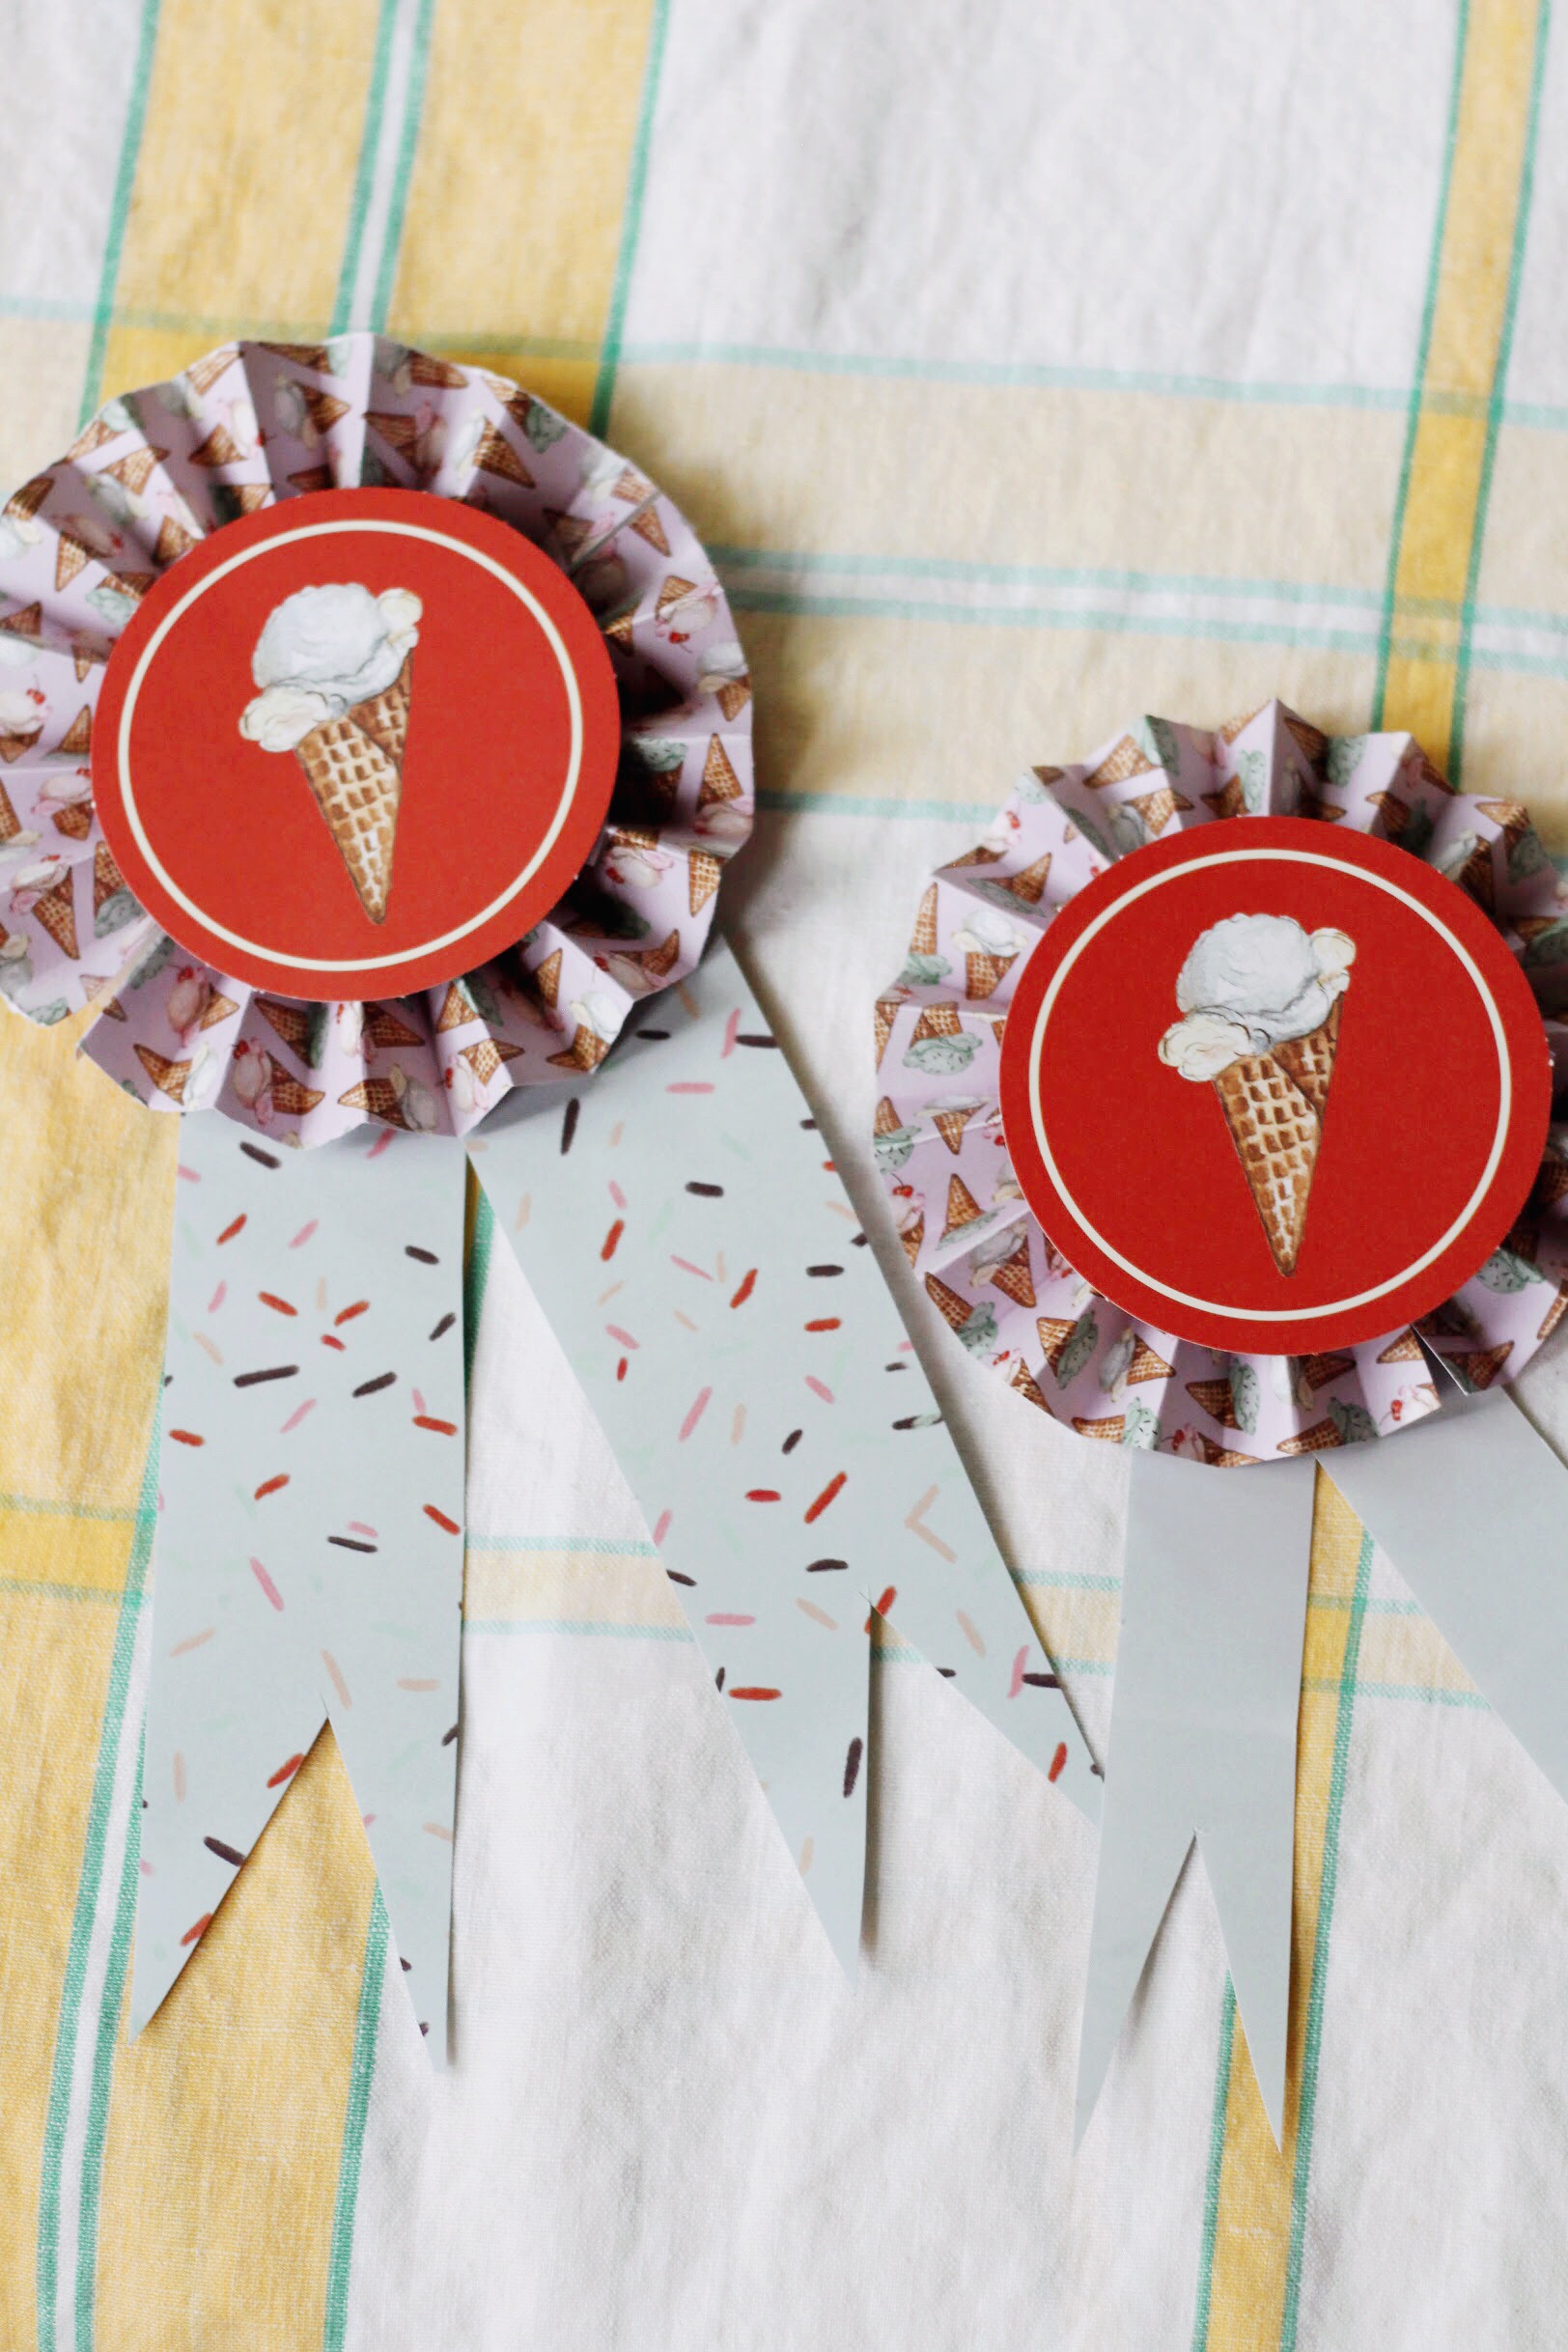 DIY Ice Cream Party Decor- The Art of Paper Crafting Book